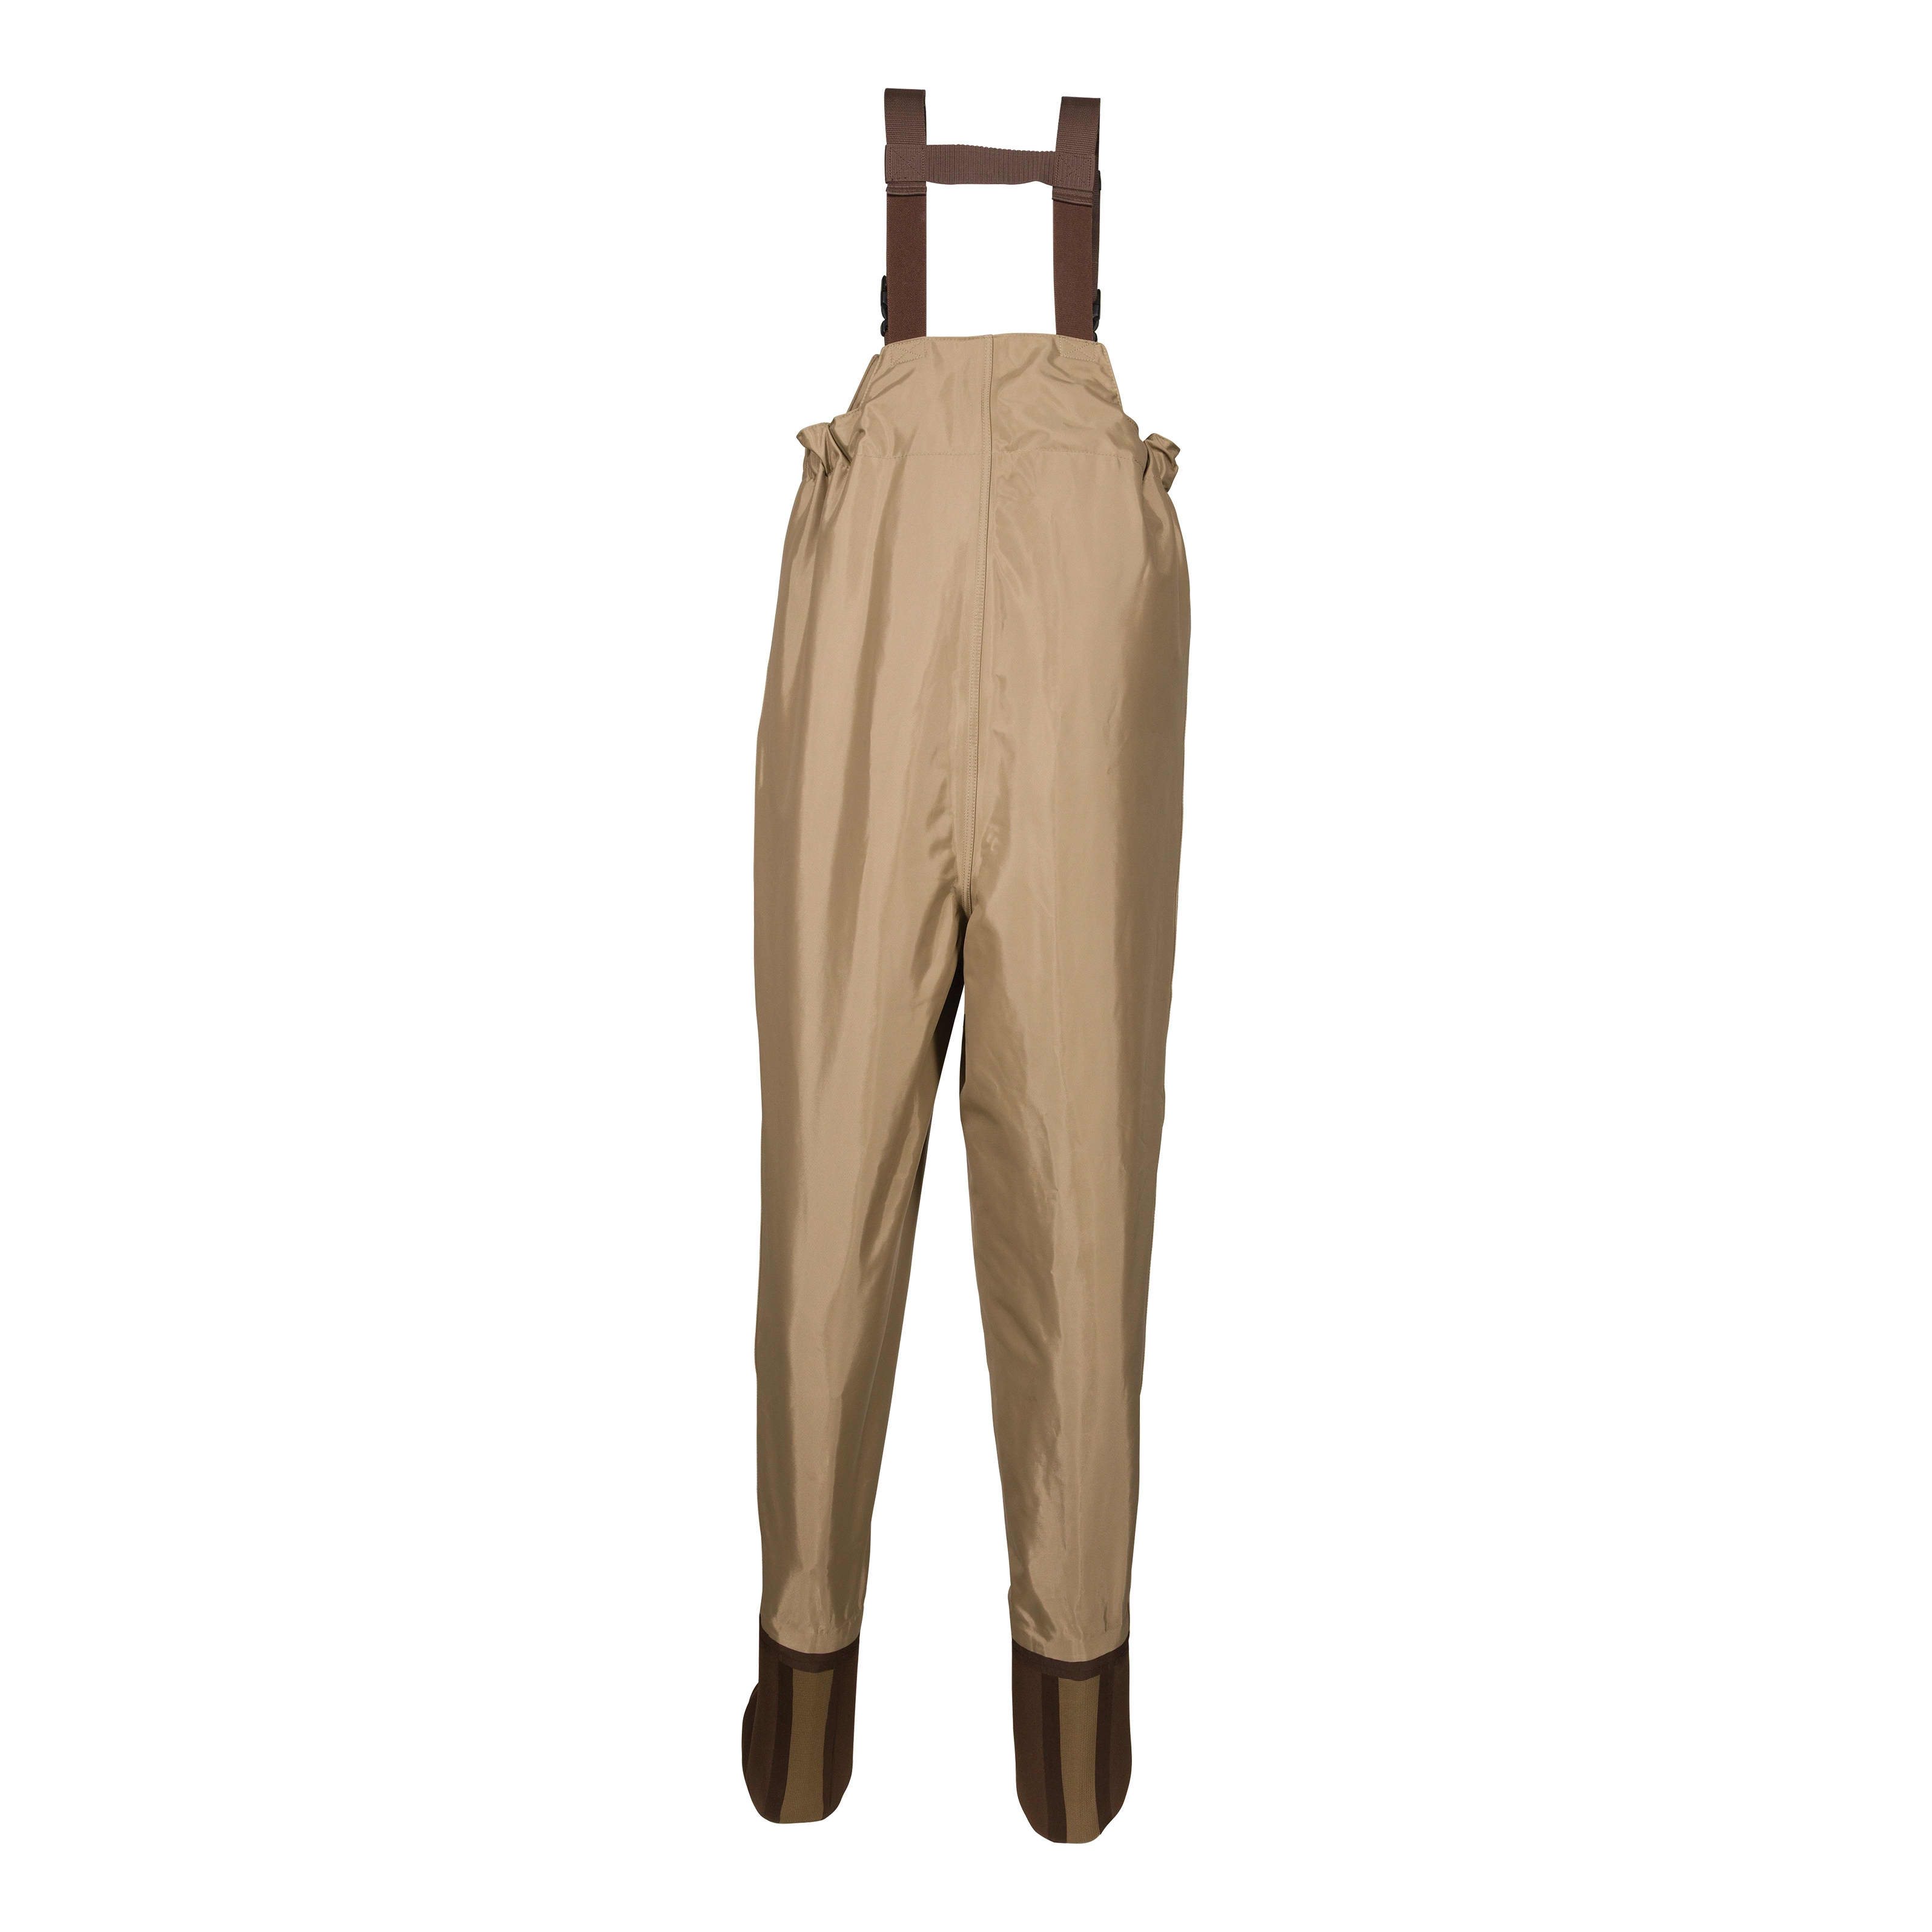 White River Fly Shop Men’s Three Forks Stocking-Foot Chest Waders 